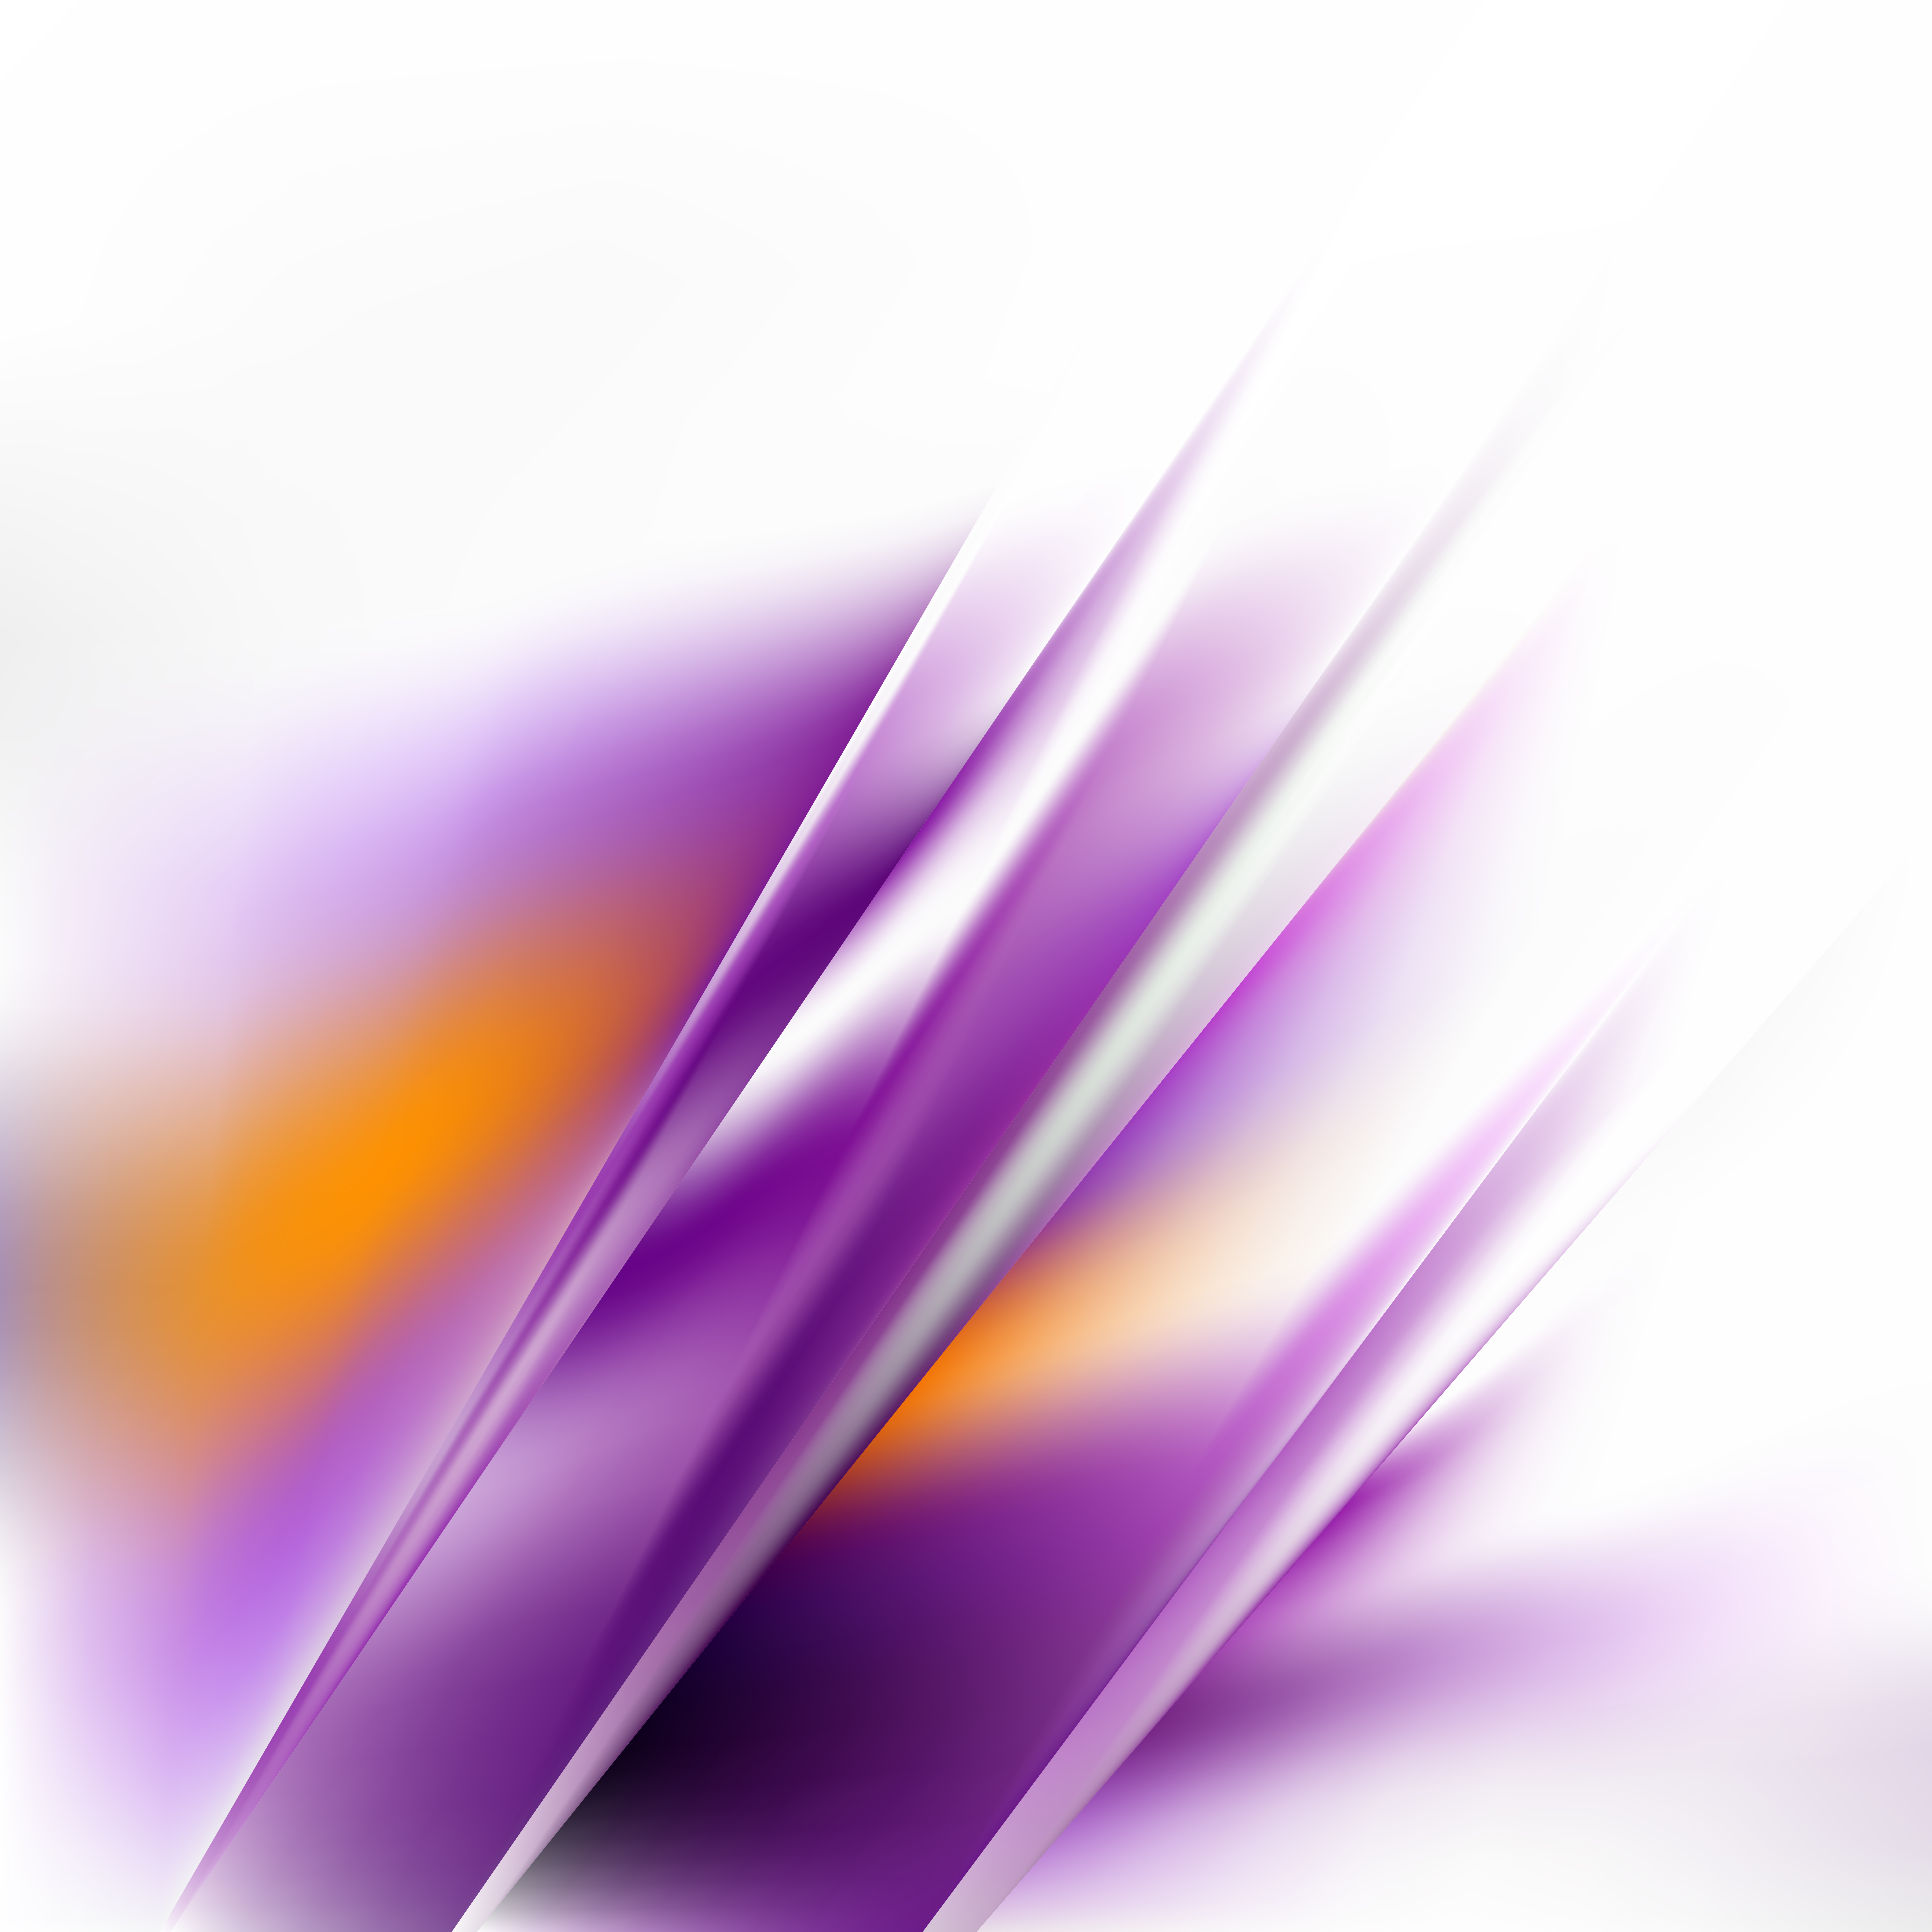 Free Purple and White Background Vector Image